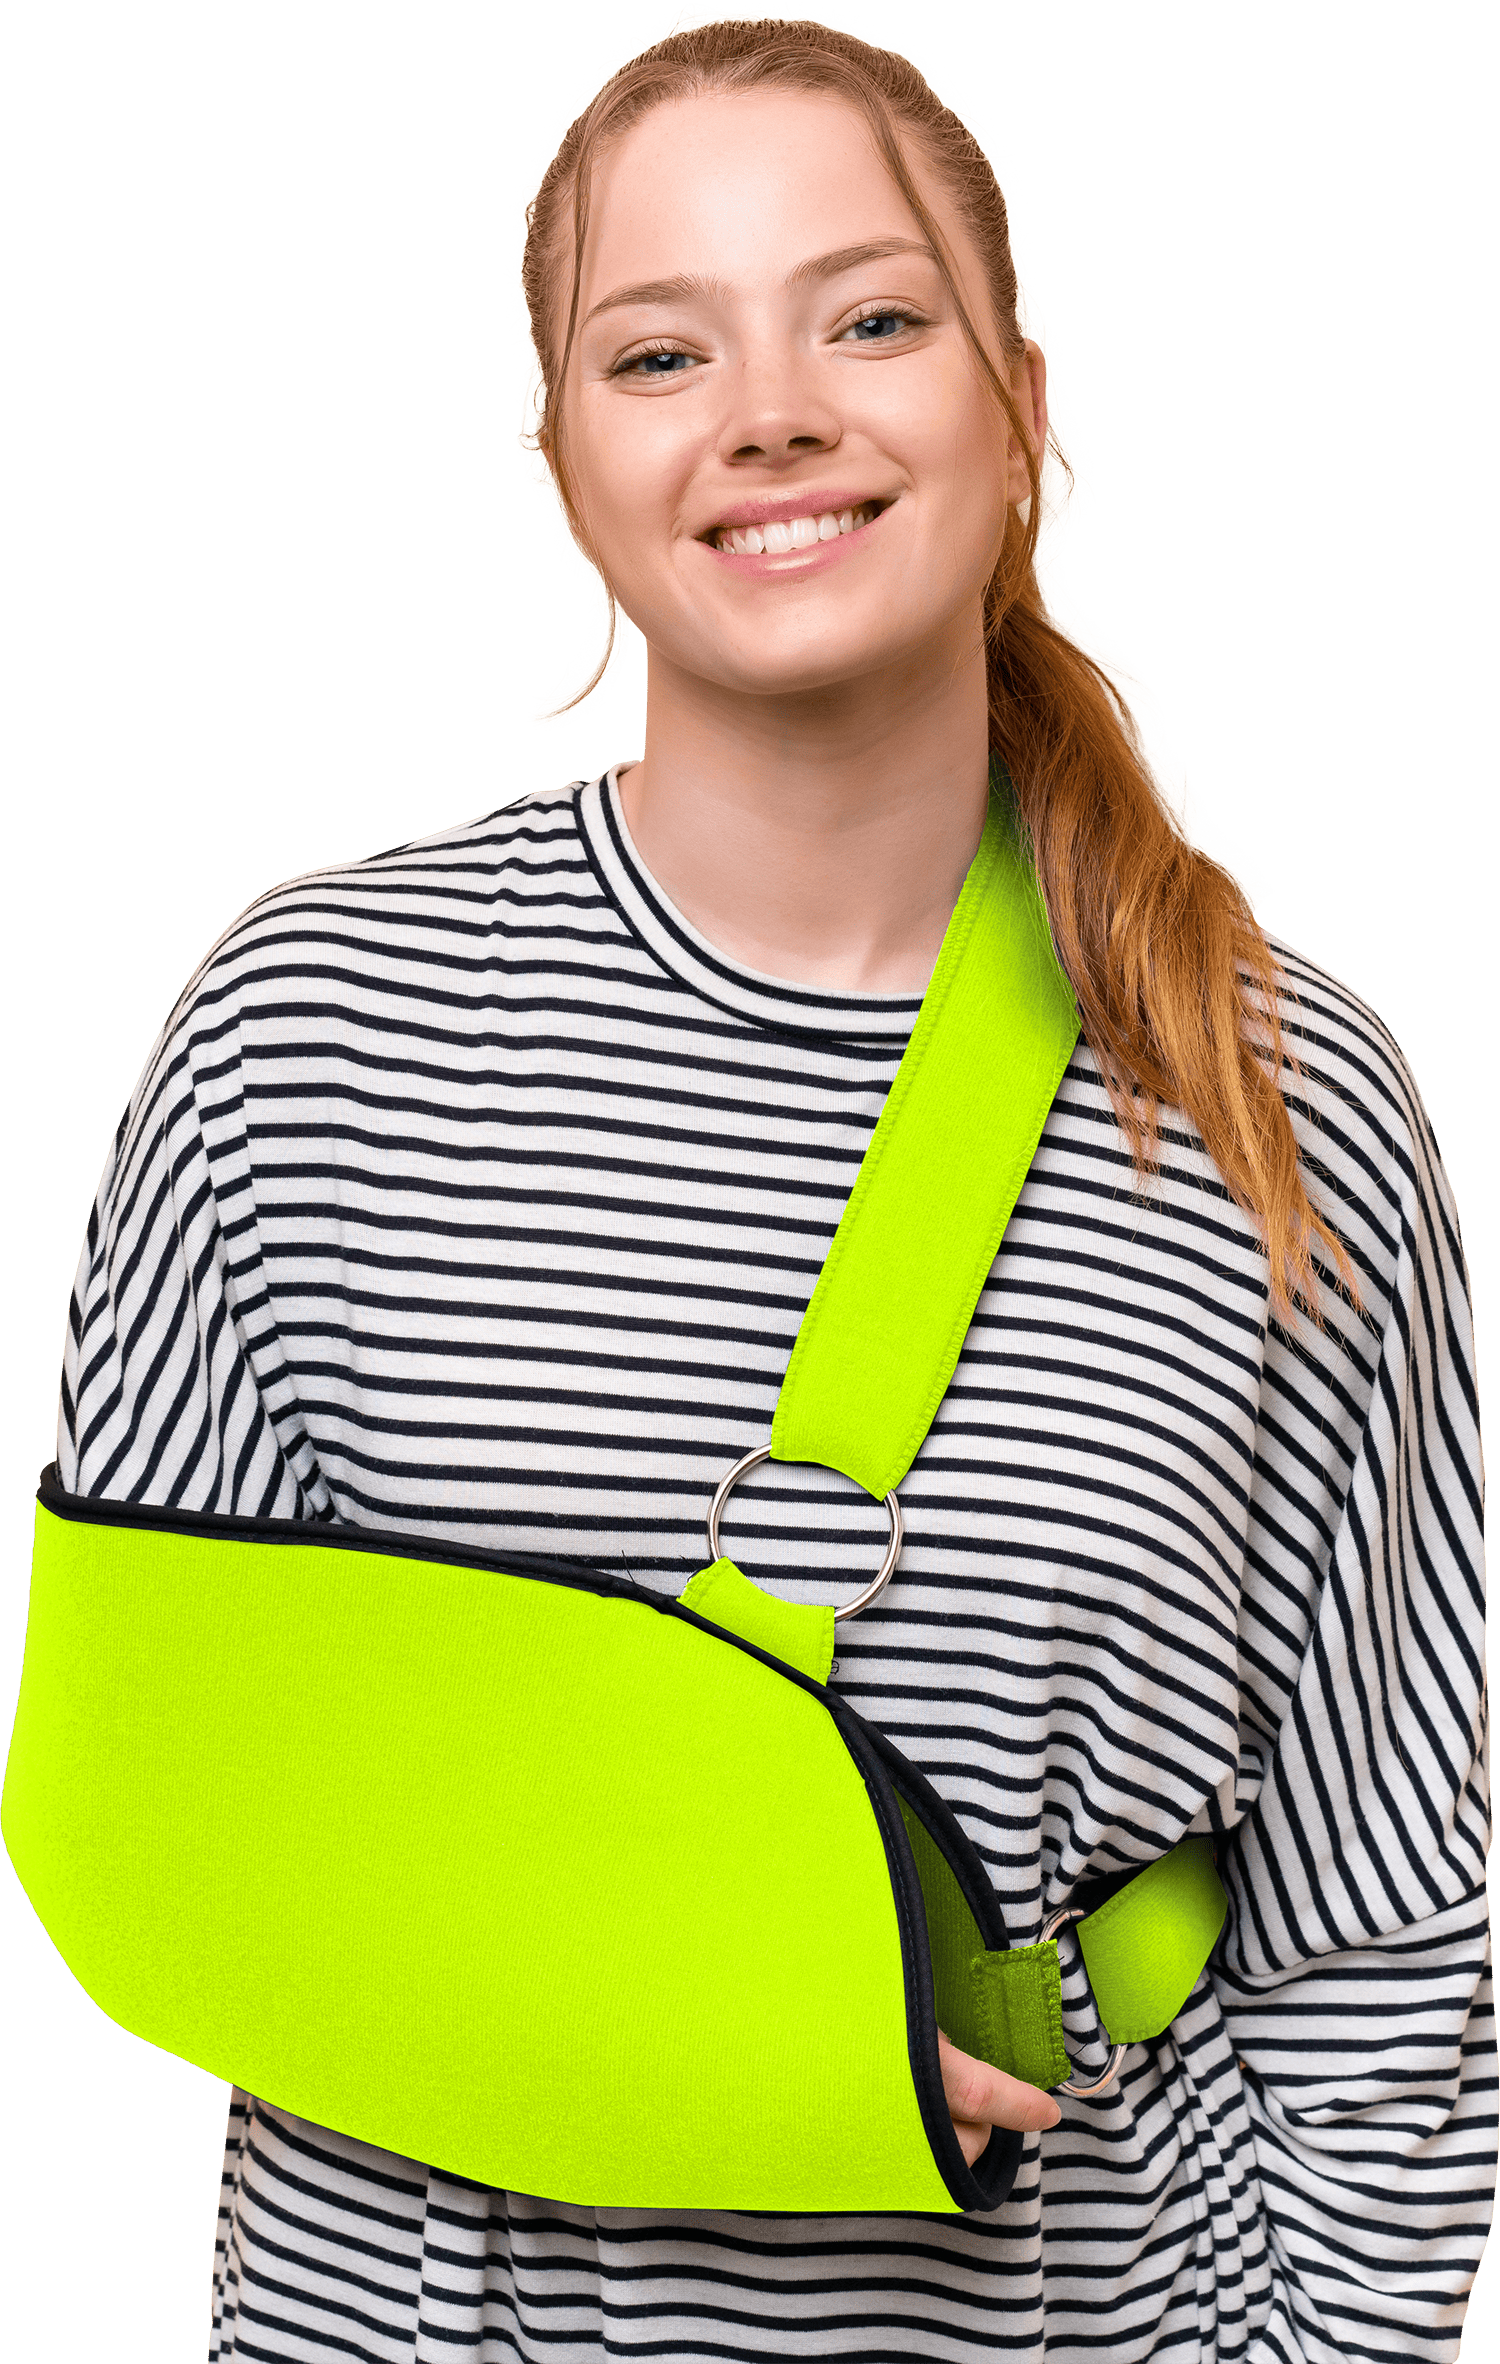 Woman with injured arm